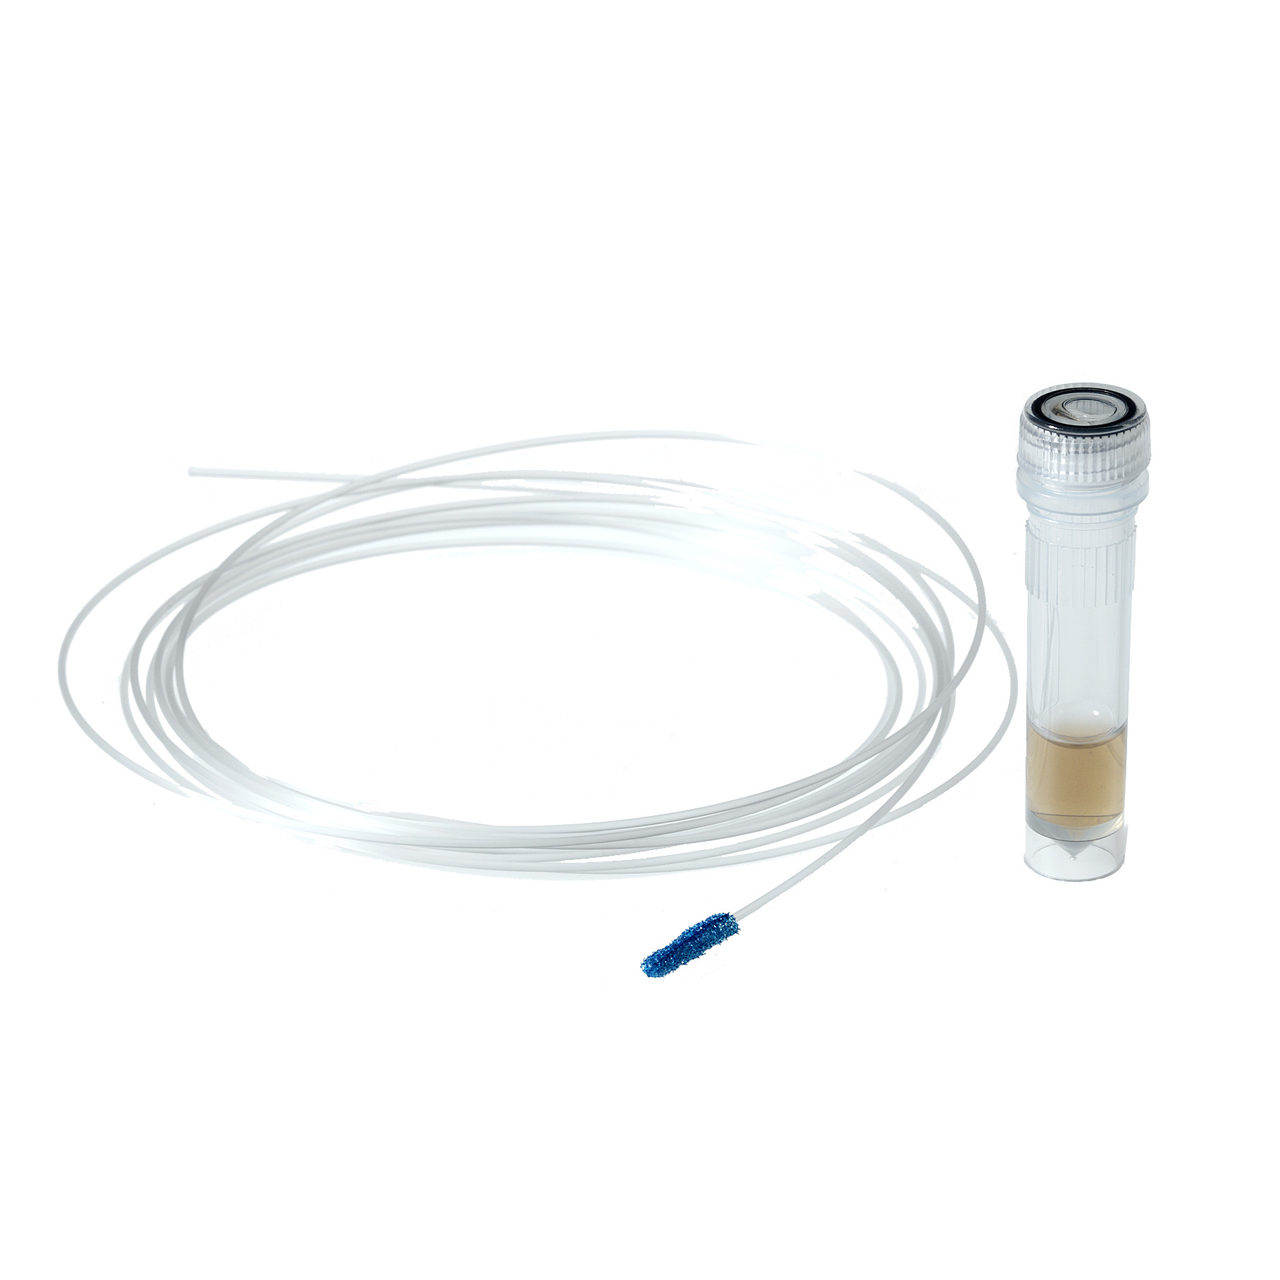 Getinge Assured Protein Test Flexible Endoscope detects residual protein in flexible endoscopes up to 2,5 m 